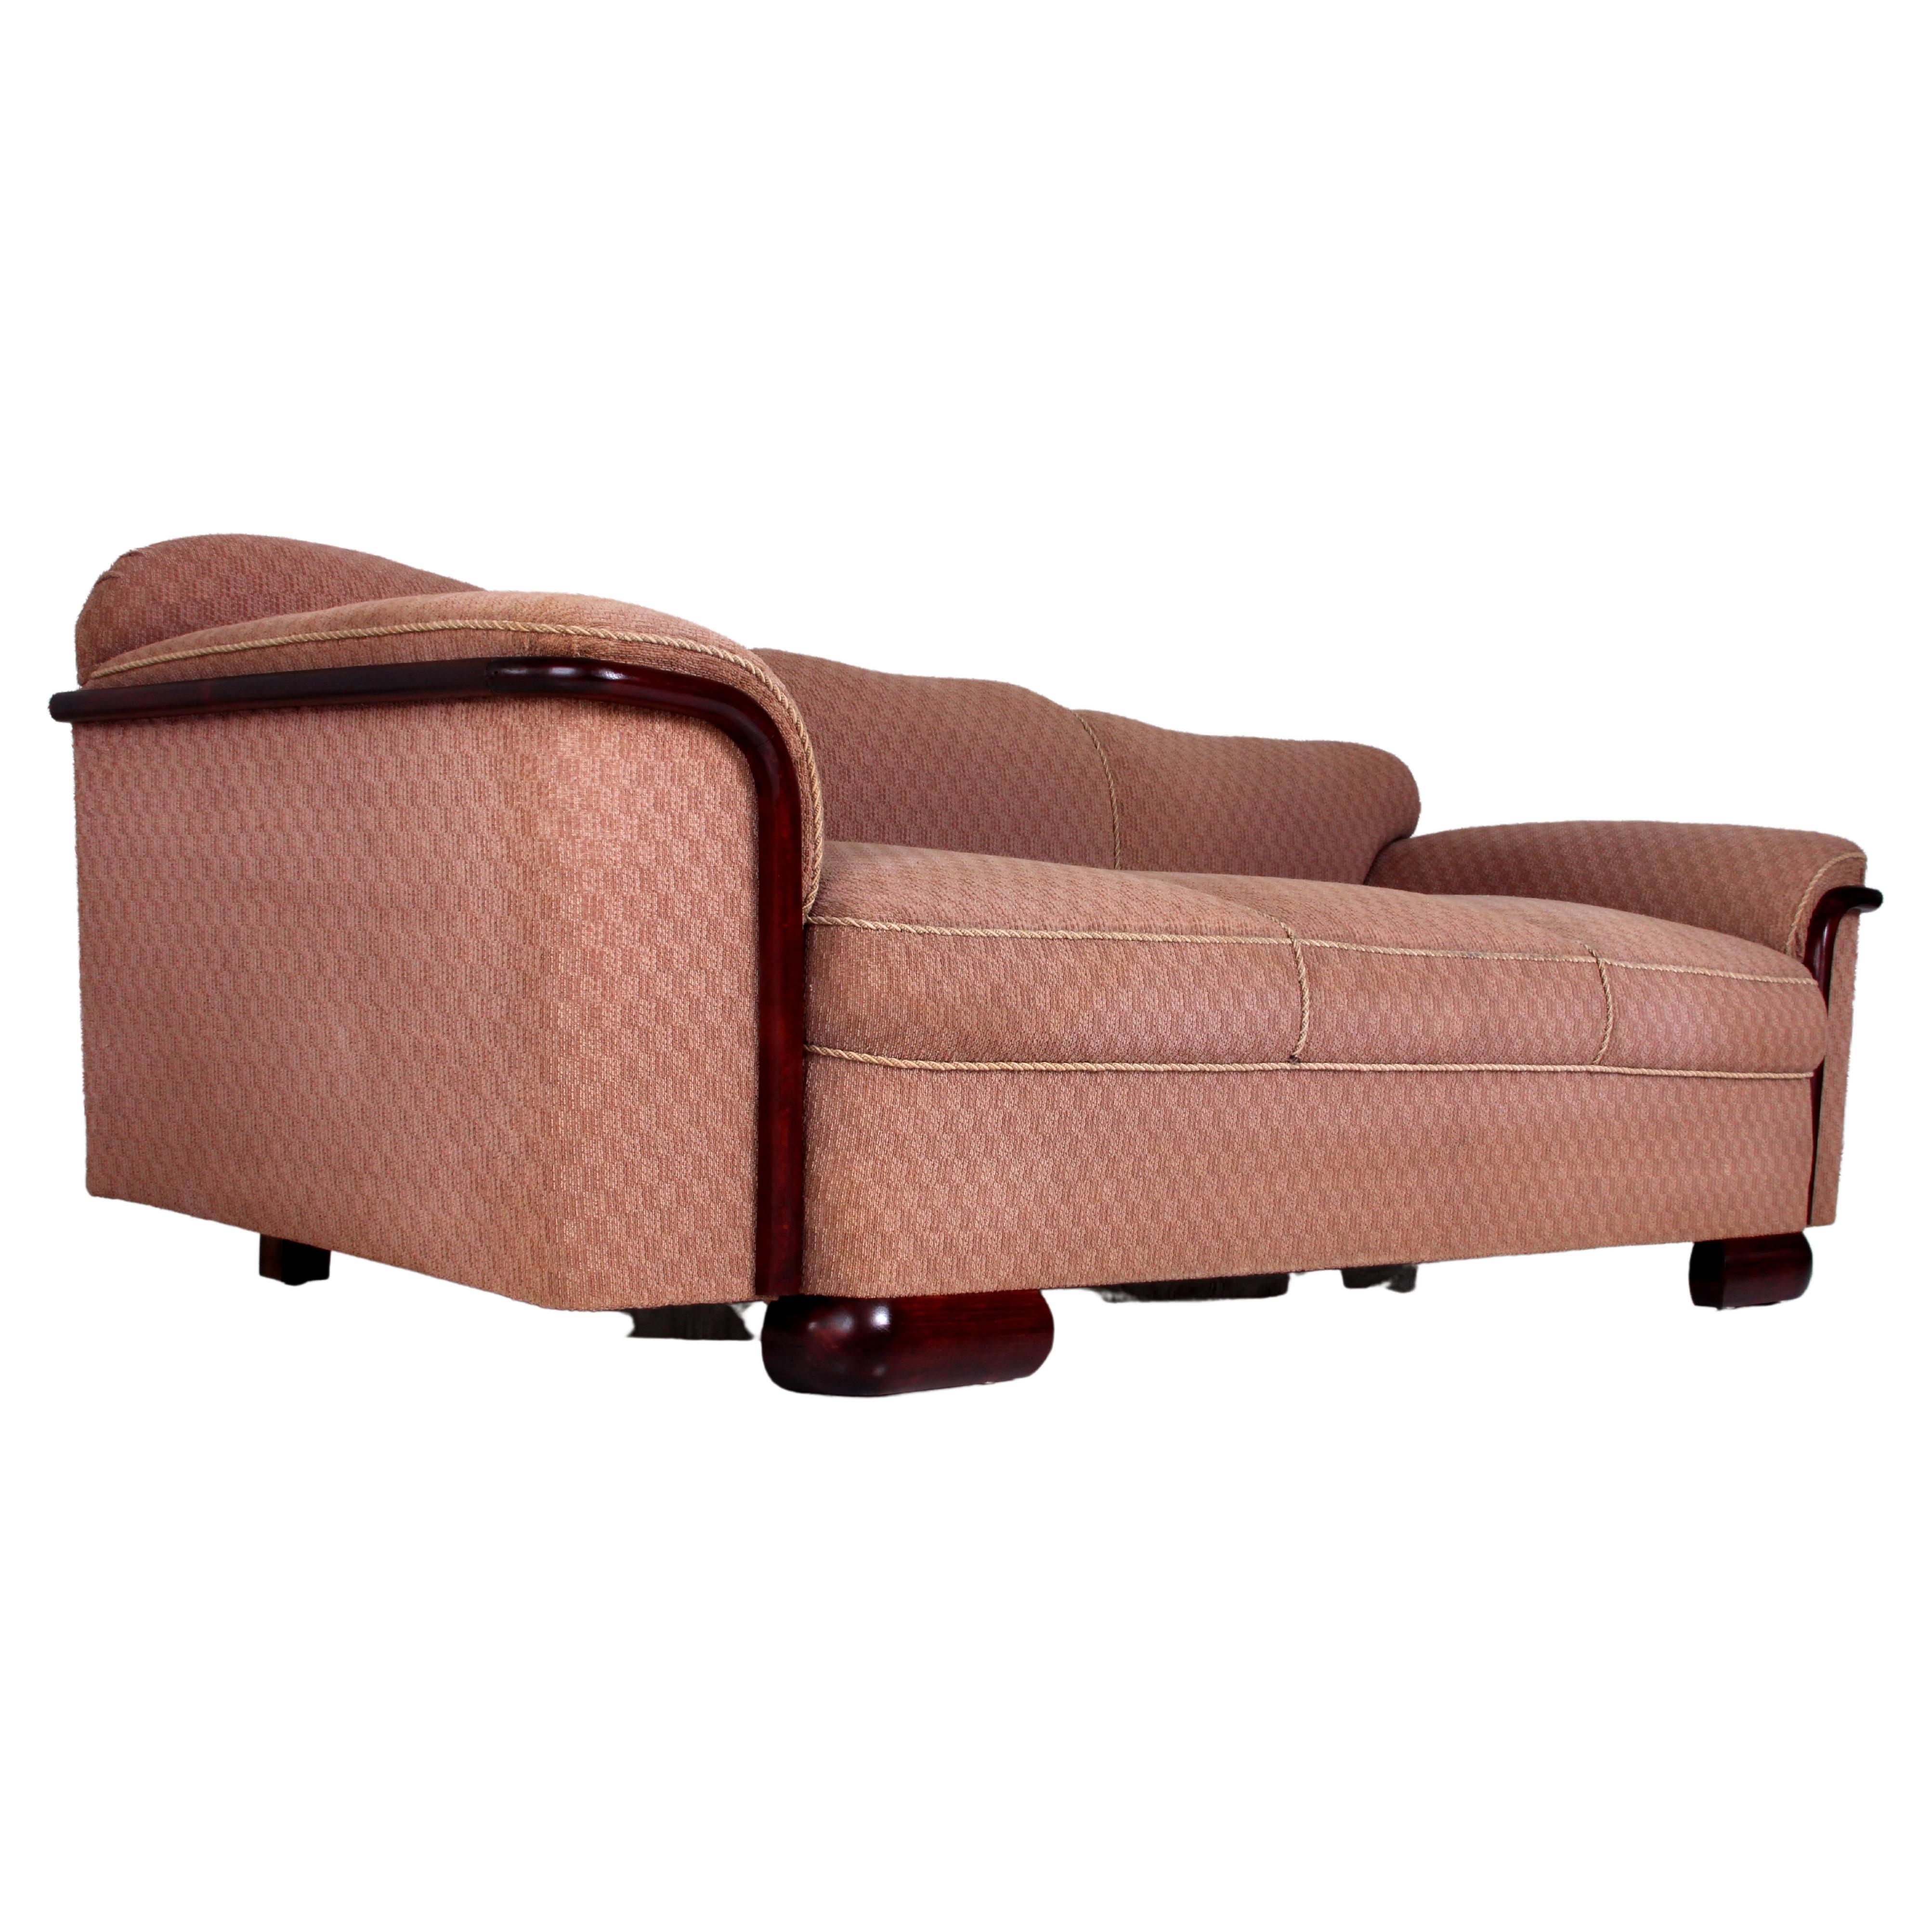 STRAIGHT classic art deco SOFA Dresden around 1930 or. fabric - wood refinished  For Sale 5